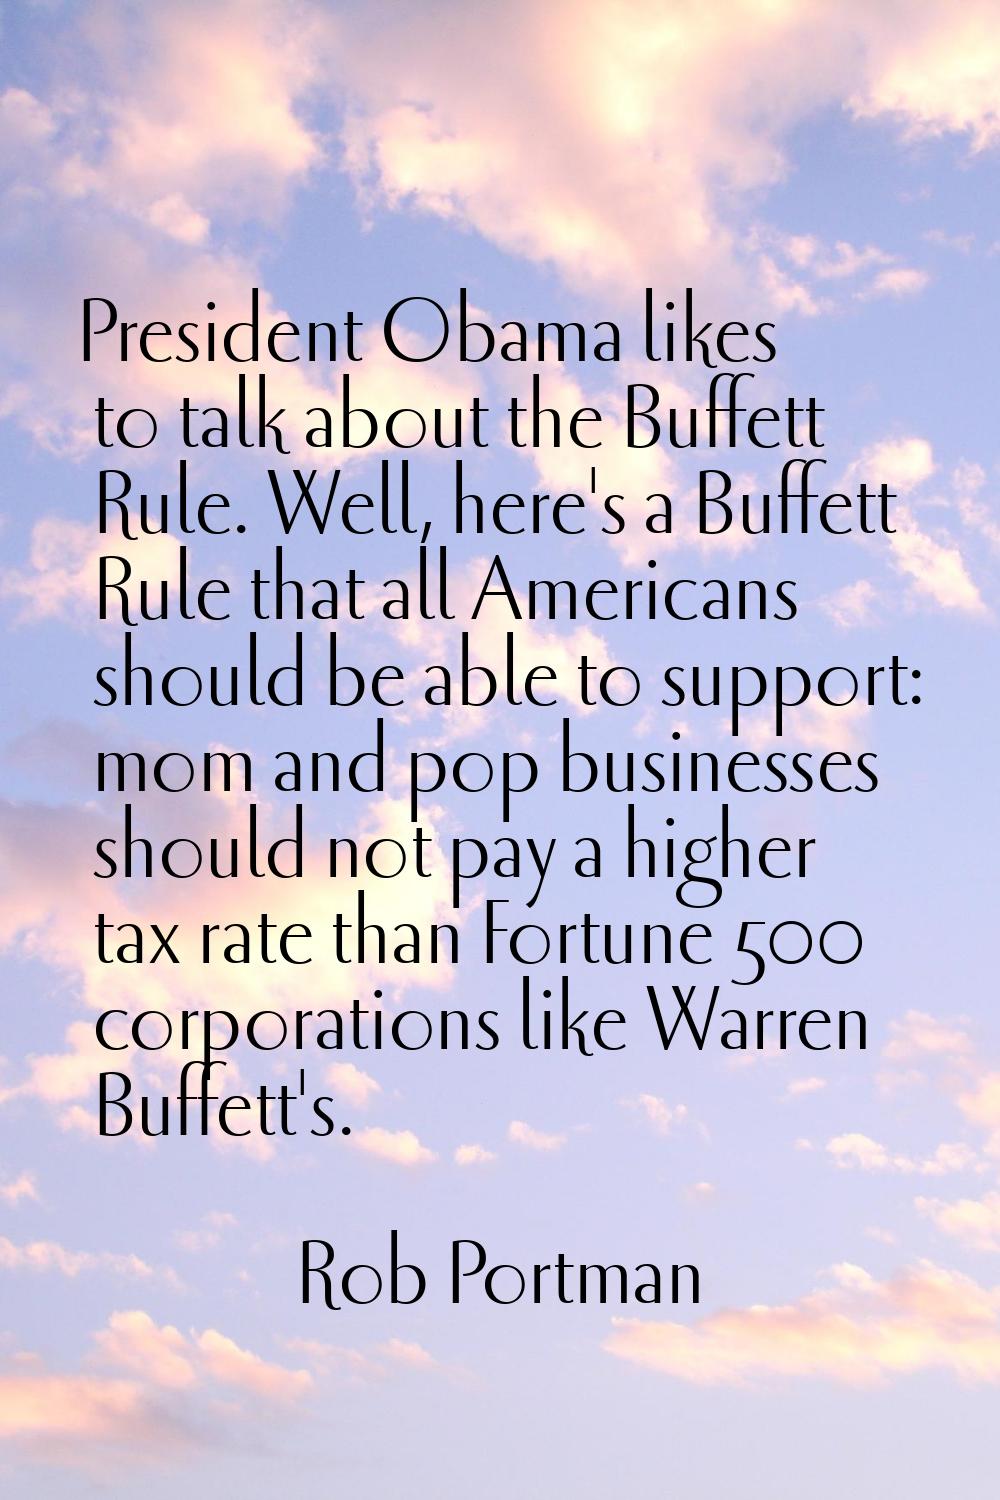 President Obama likes to talk about the Buffett Rule. Well, here's a Buffett Rule that all American